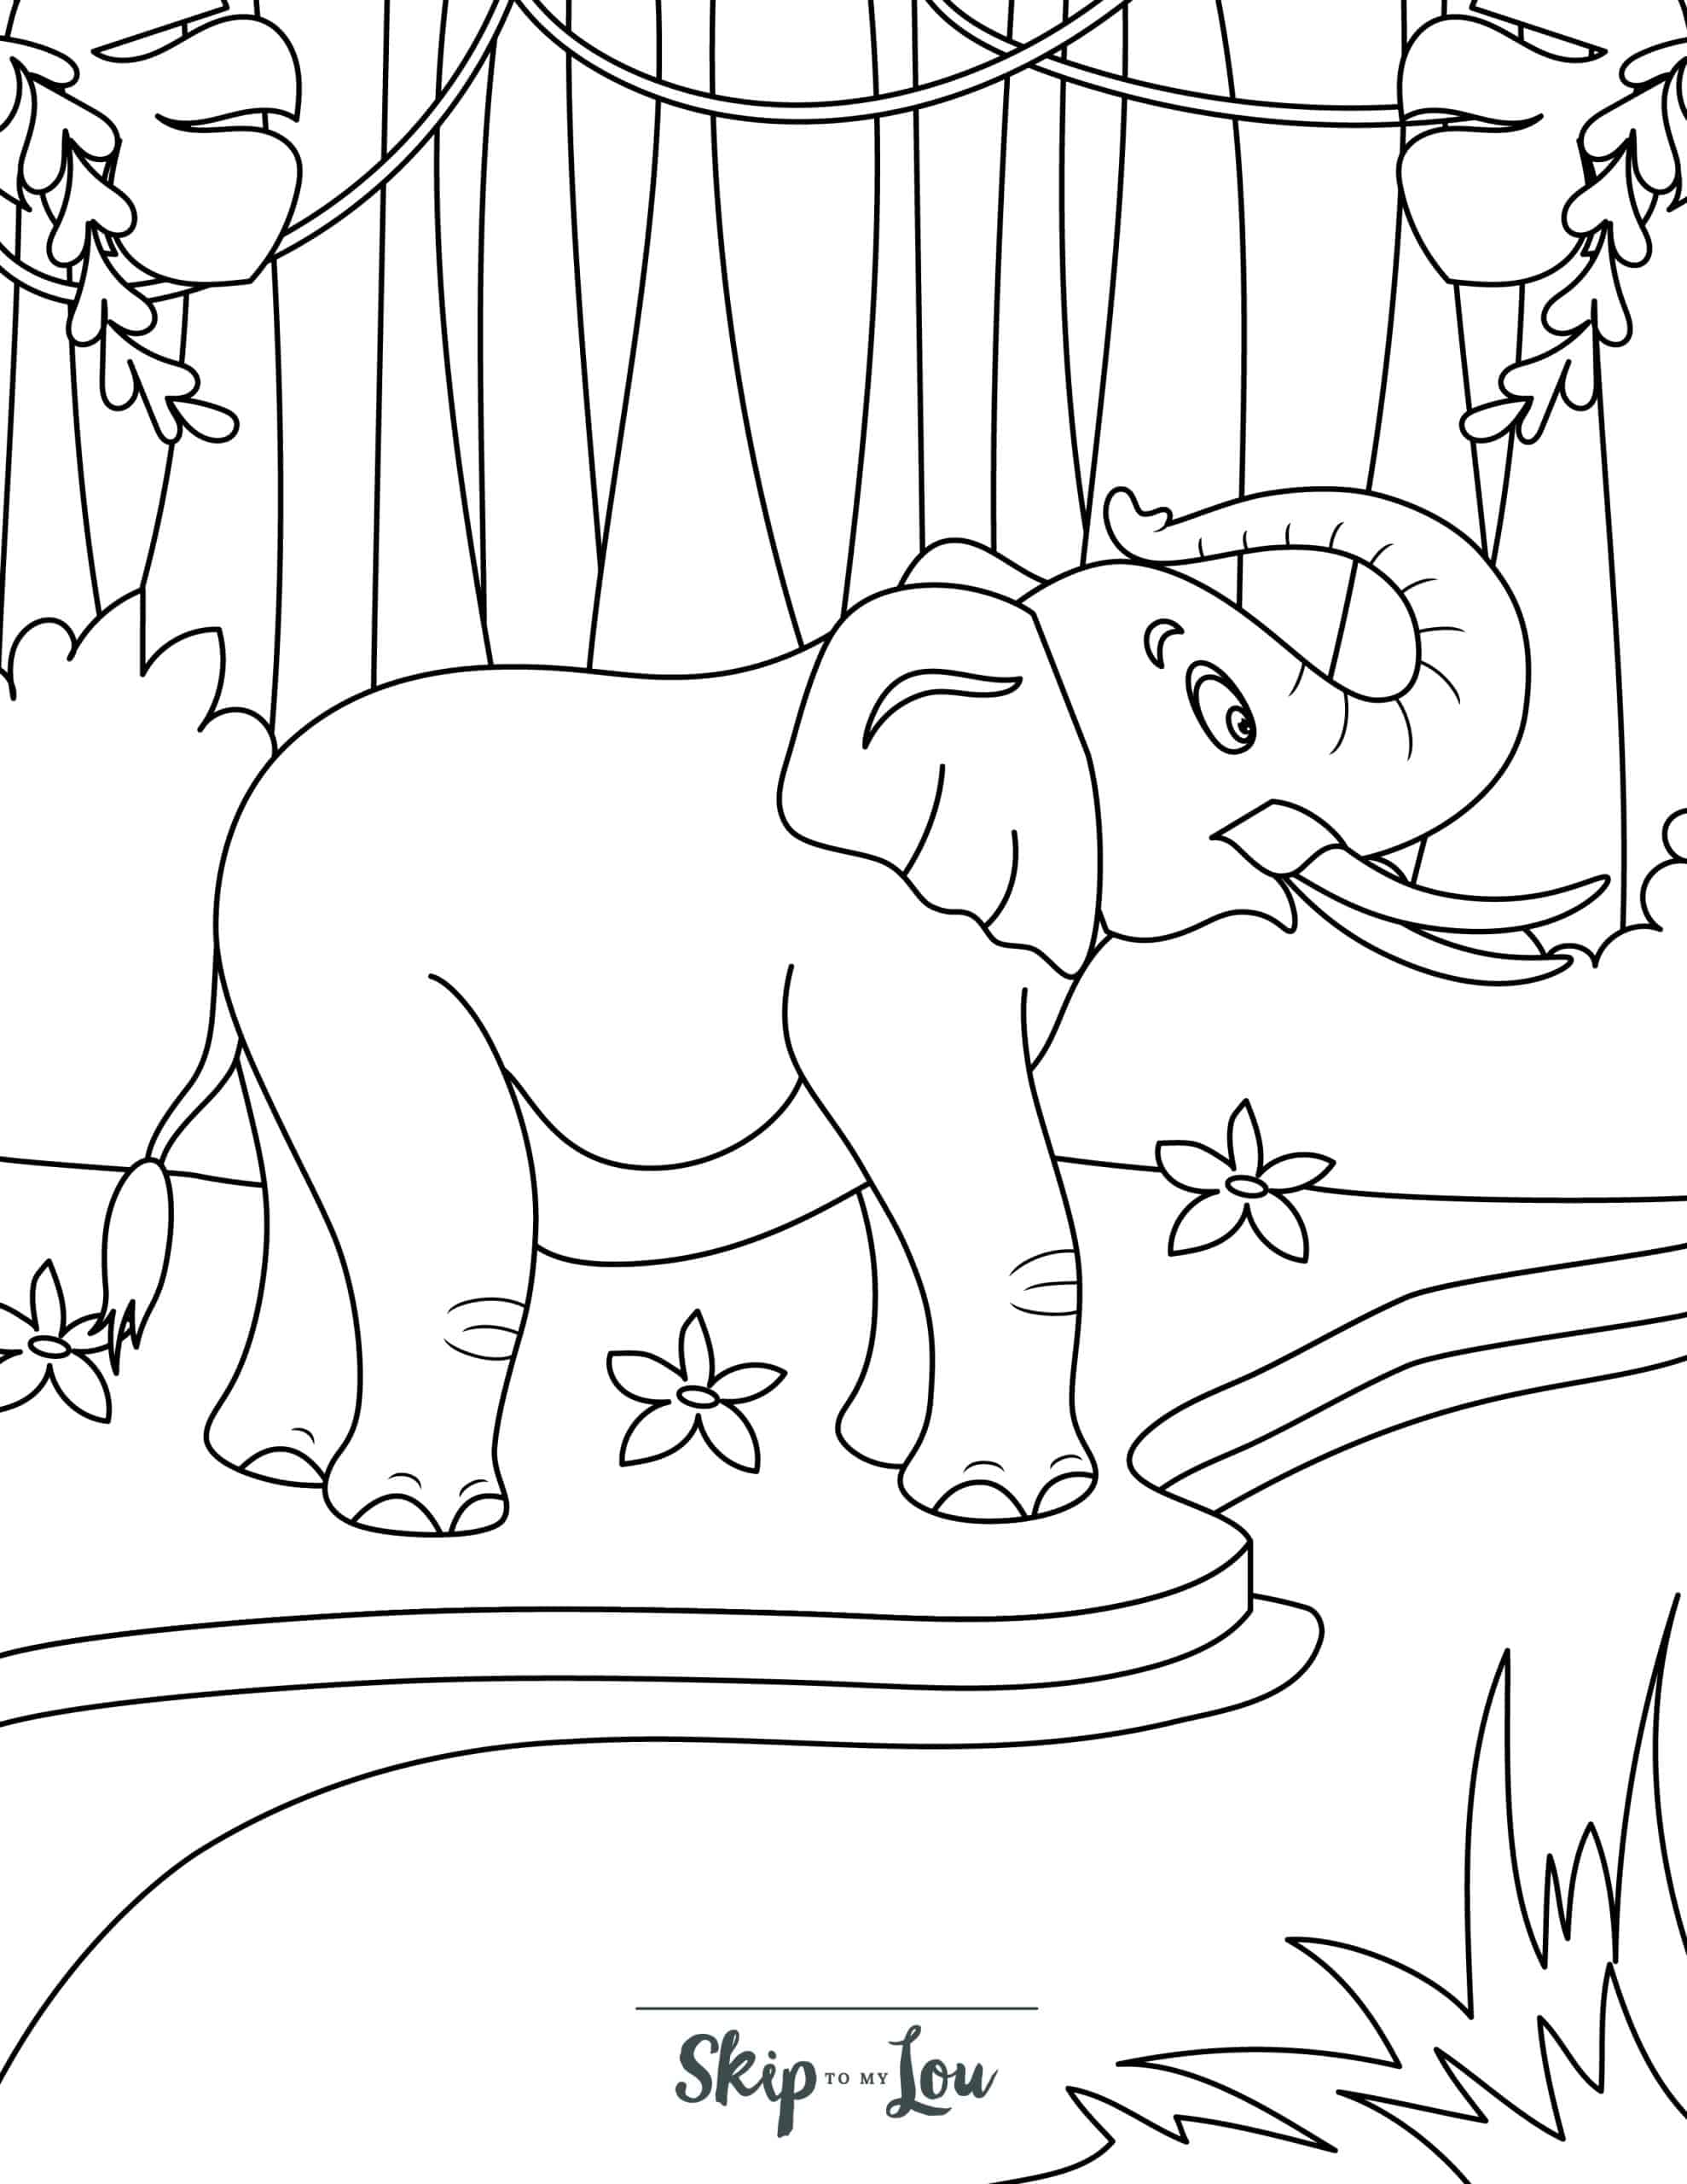 Free elephant coloring pages with full book skip to my lou